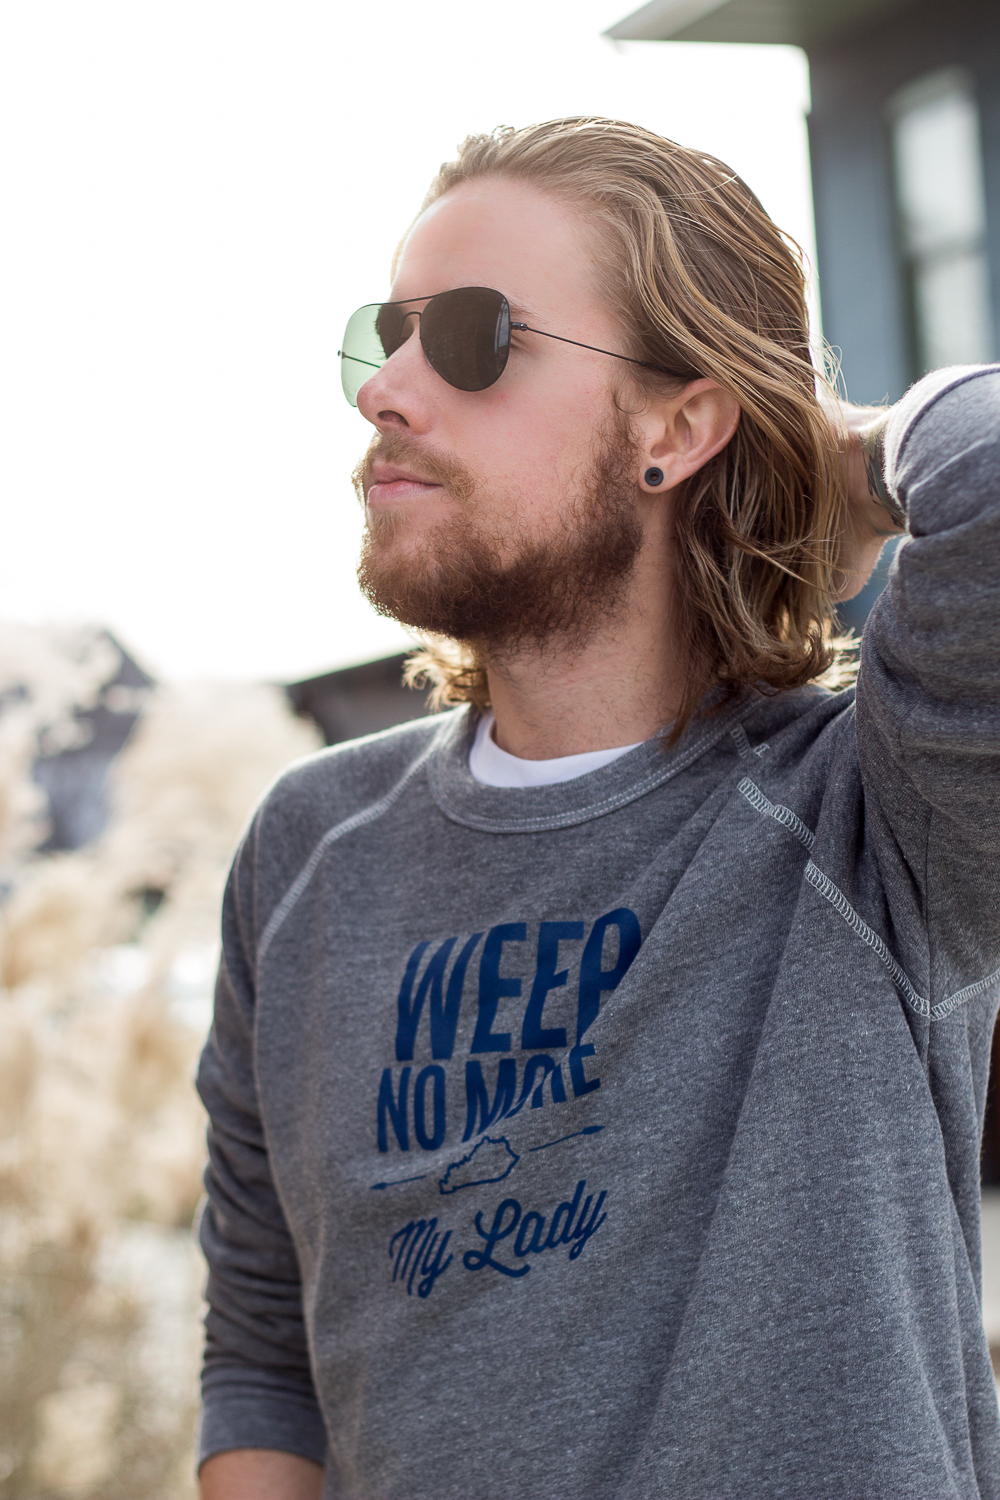 The Kentucky Gent, a Louisville, Kentucky men's life and style blogger, in Shop Local KY Weep No More My Lady Sweatshirt, Levi's Made and Crafted Denim, Converse Chuck Taylors, and Ray-Ban Aviator Sunglasses.